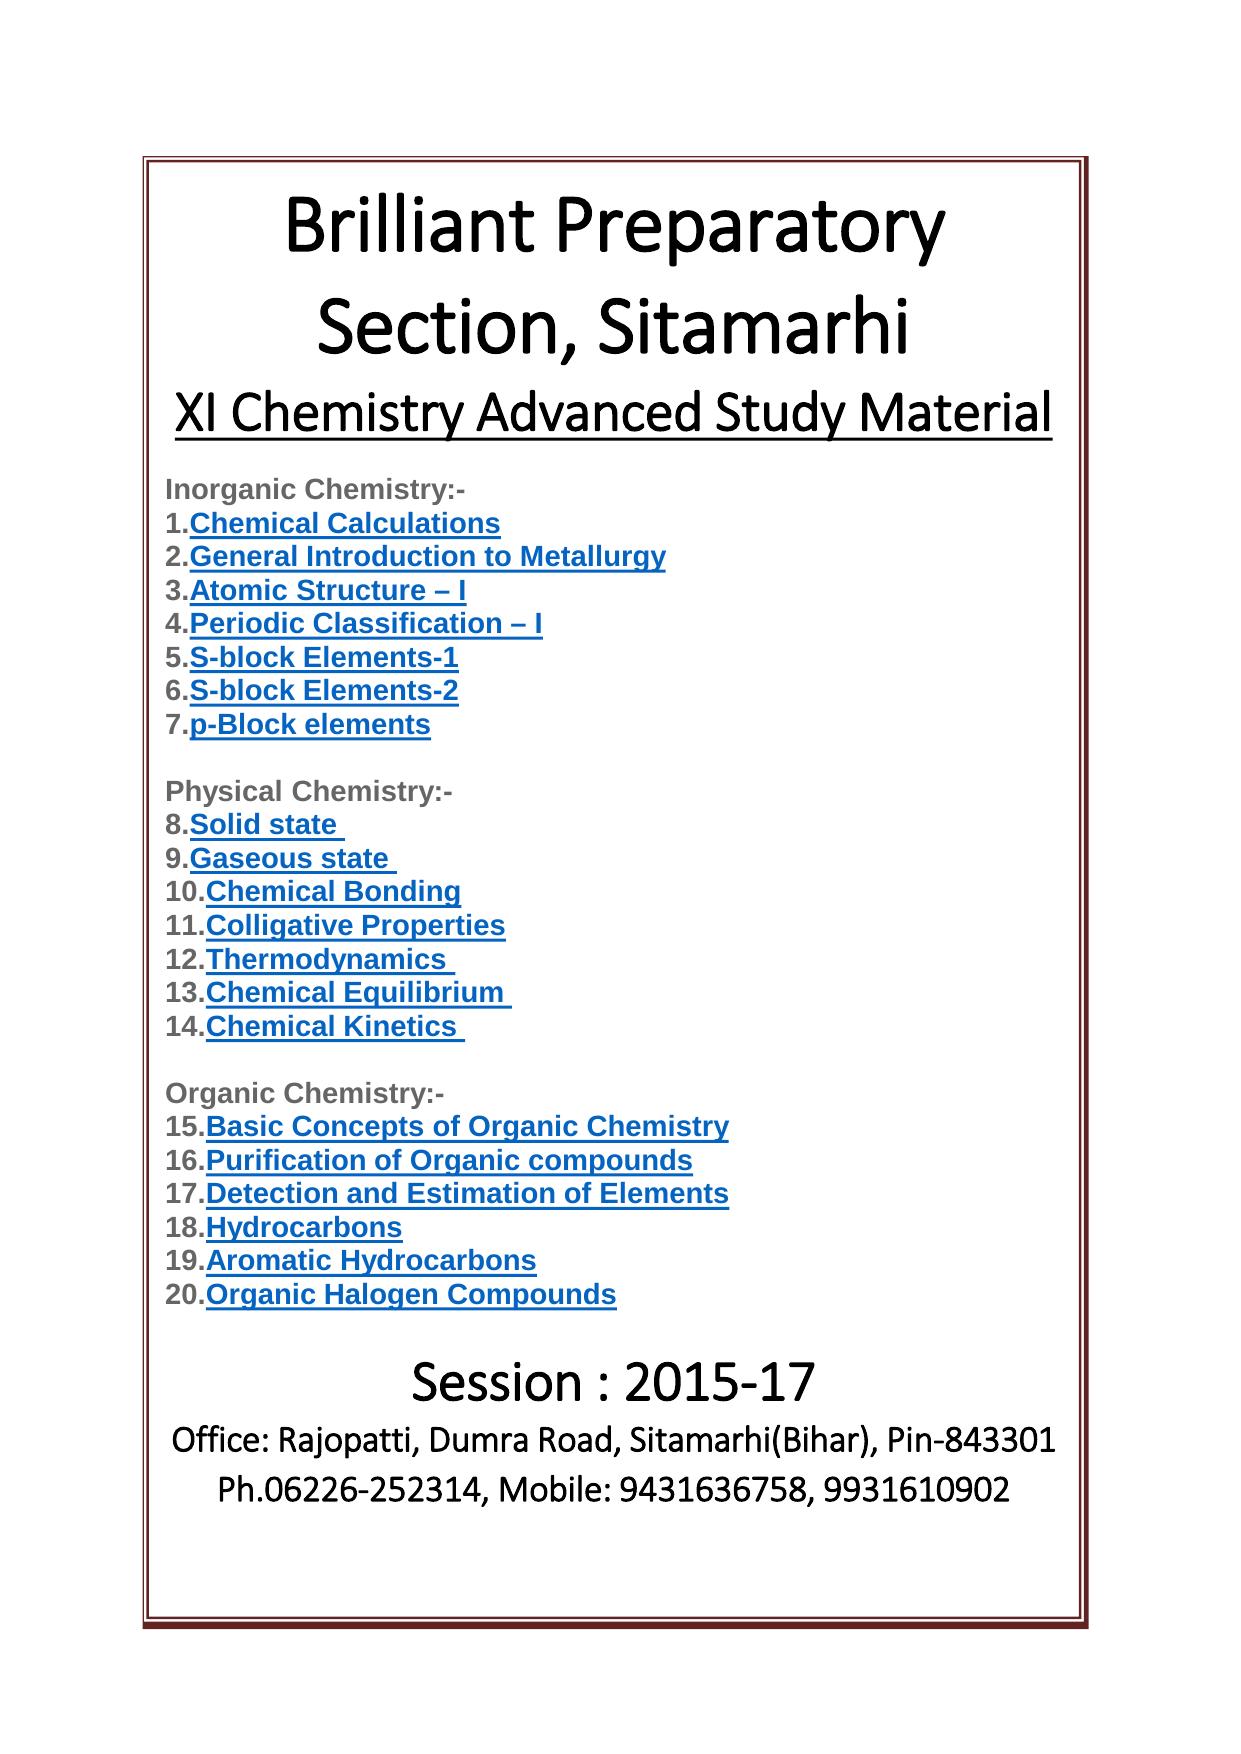 15. basic concepts of organic chemistry 2015